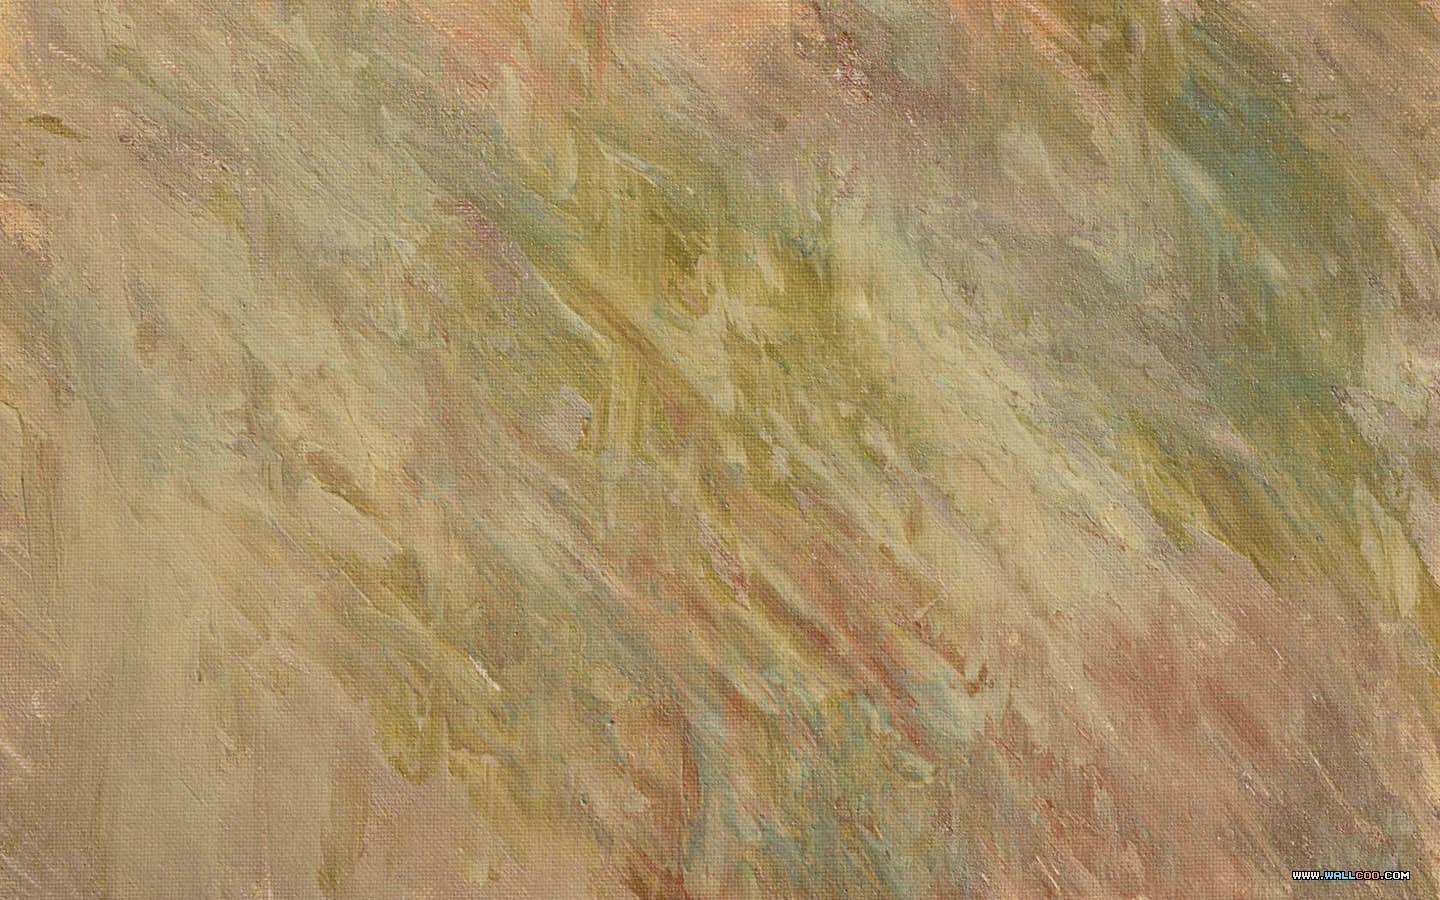 Painted S Texture With Brush Strokes No Desktop